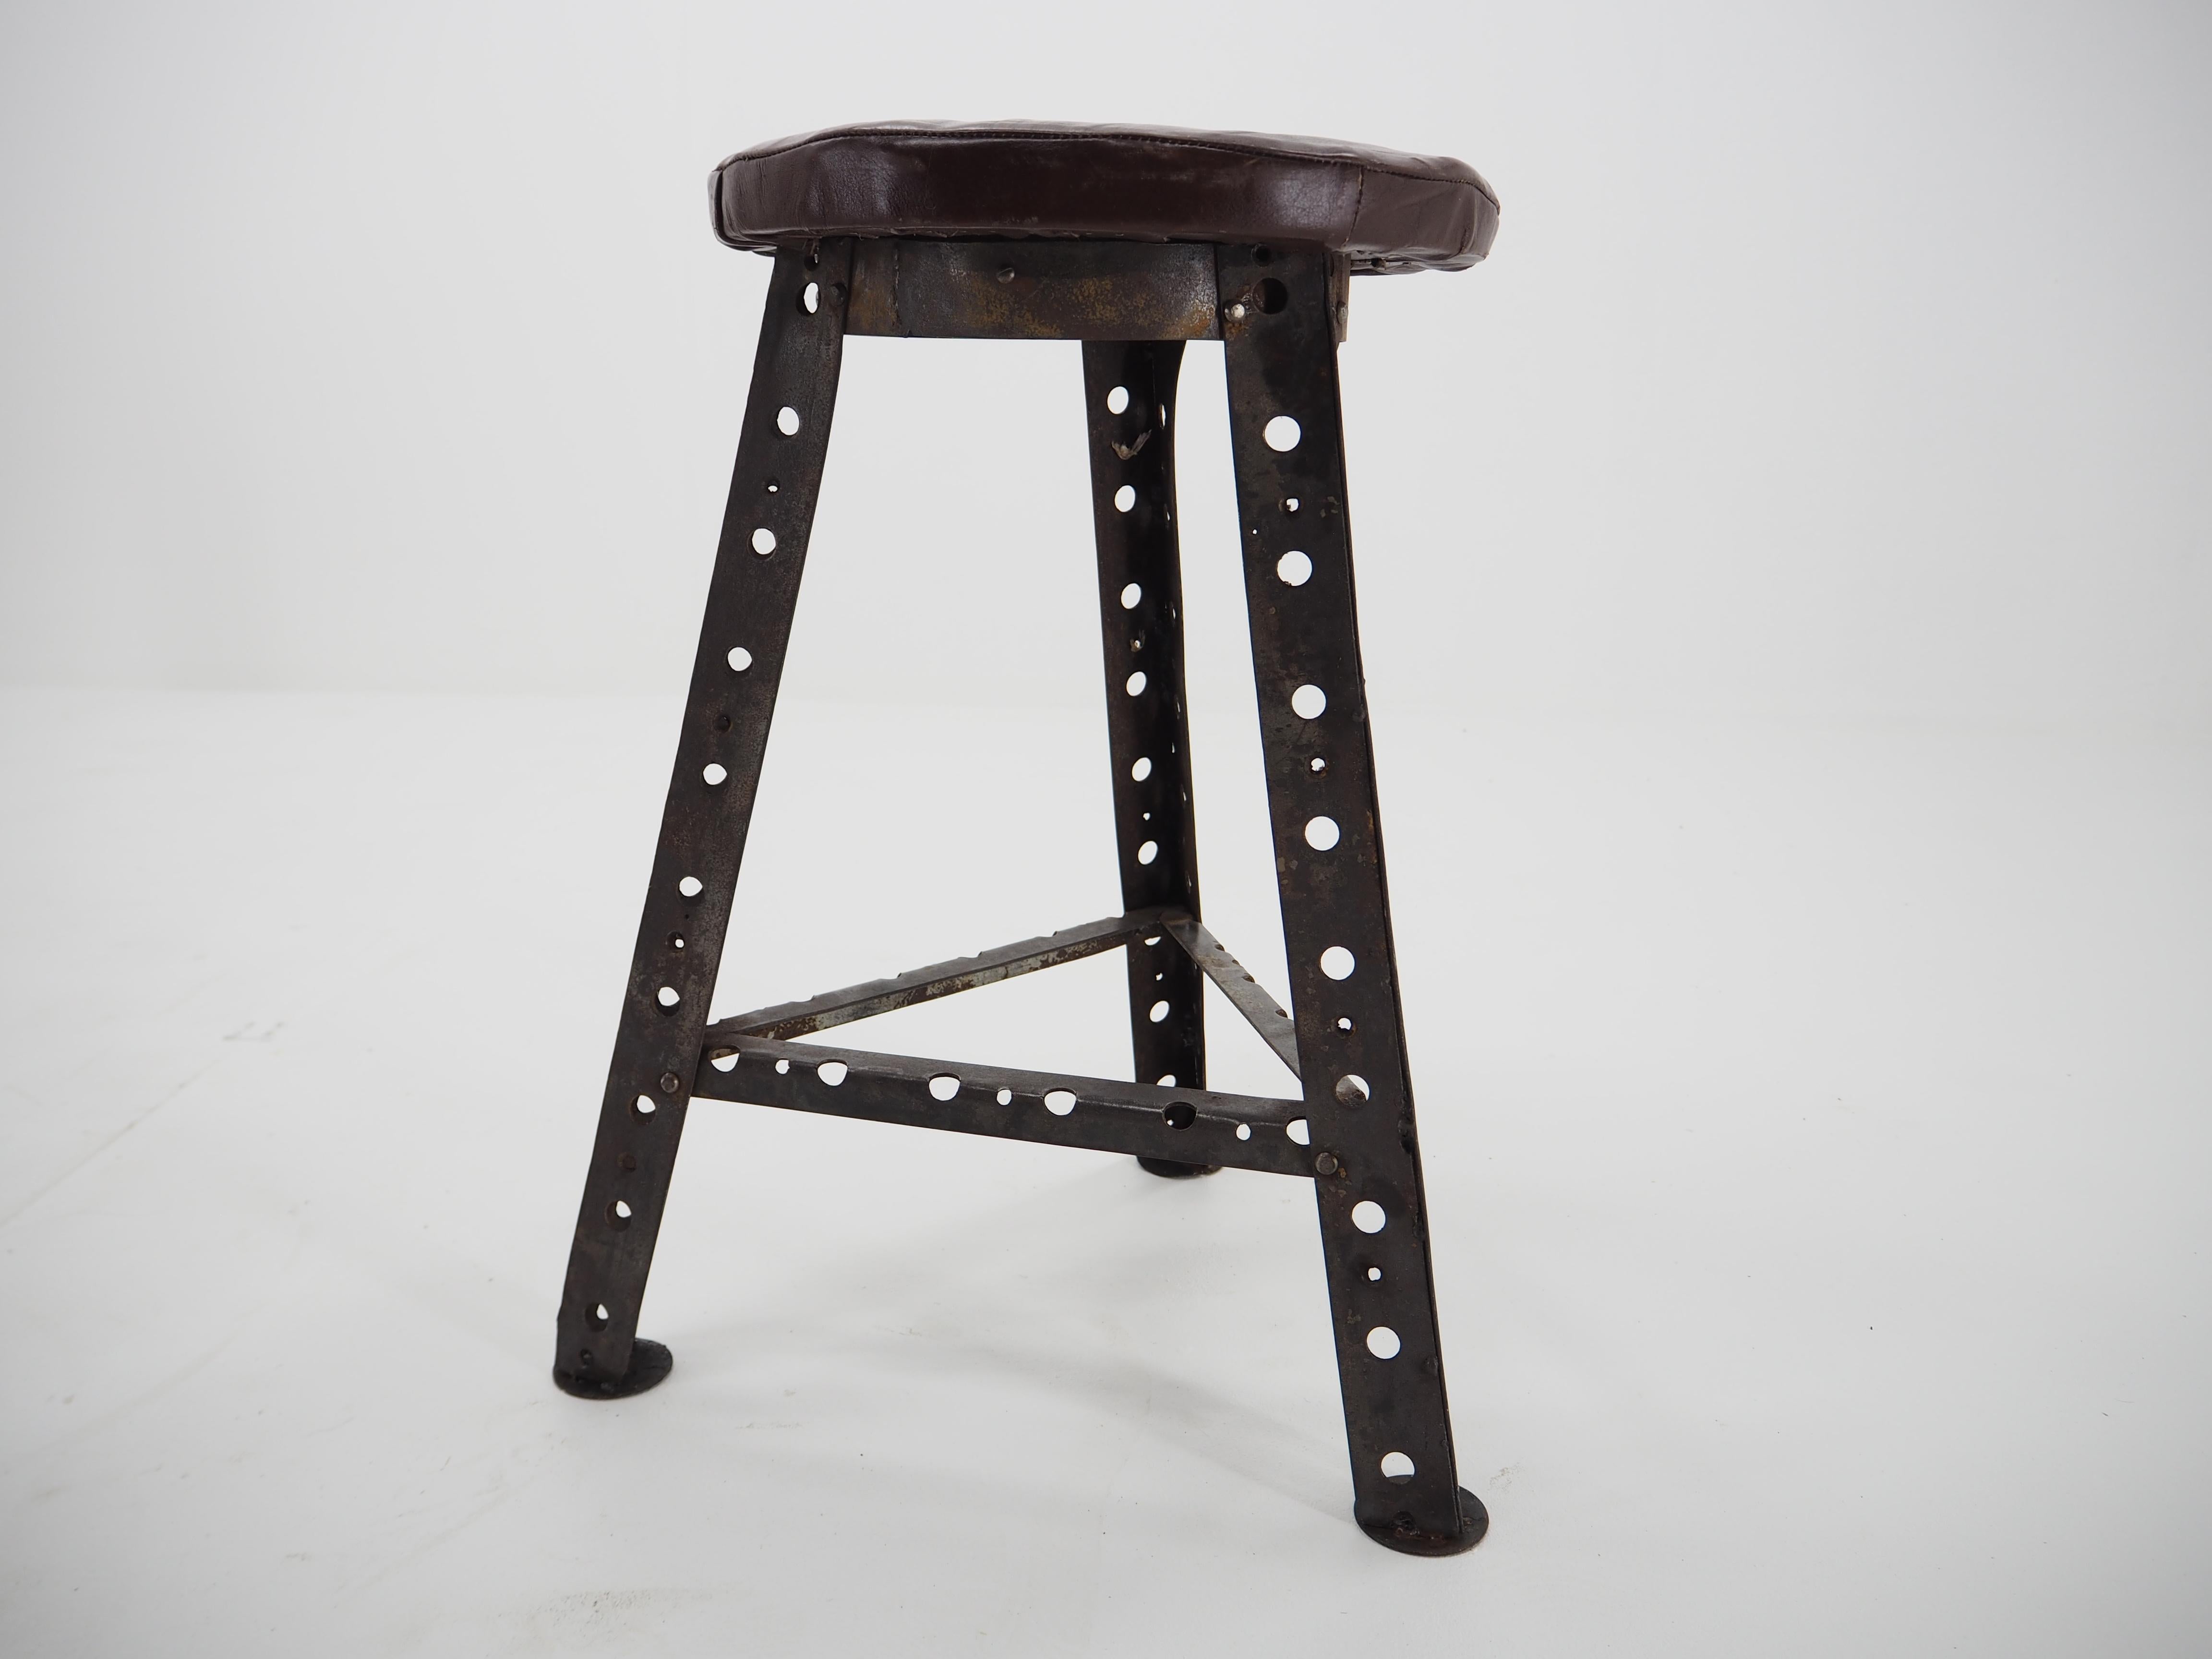 - Leather and steel
- Industrial style
- In fabric condition
- Well sitting.
 